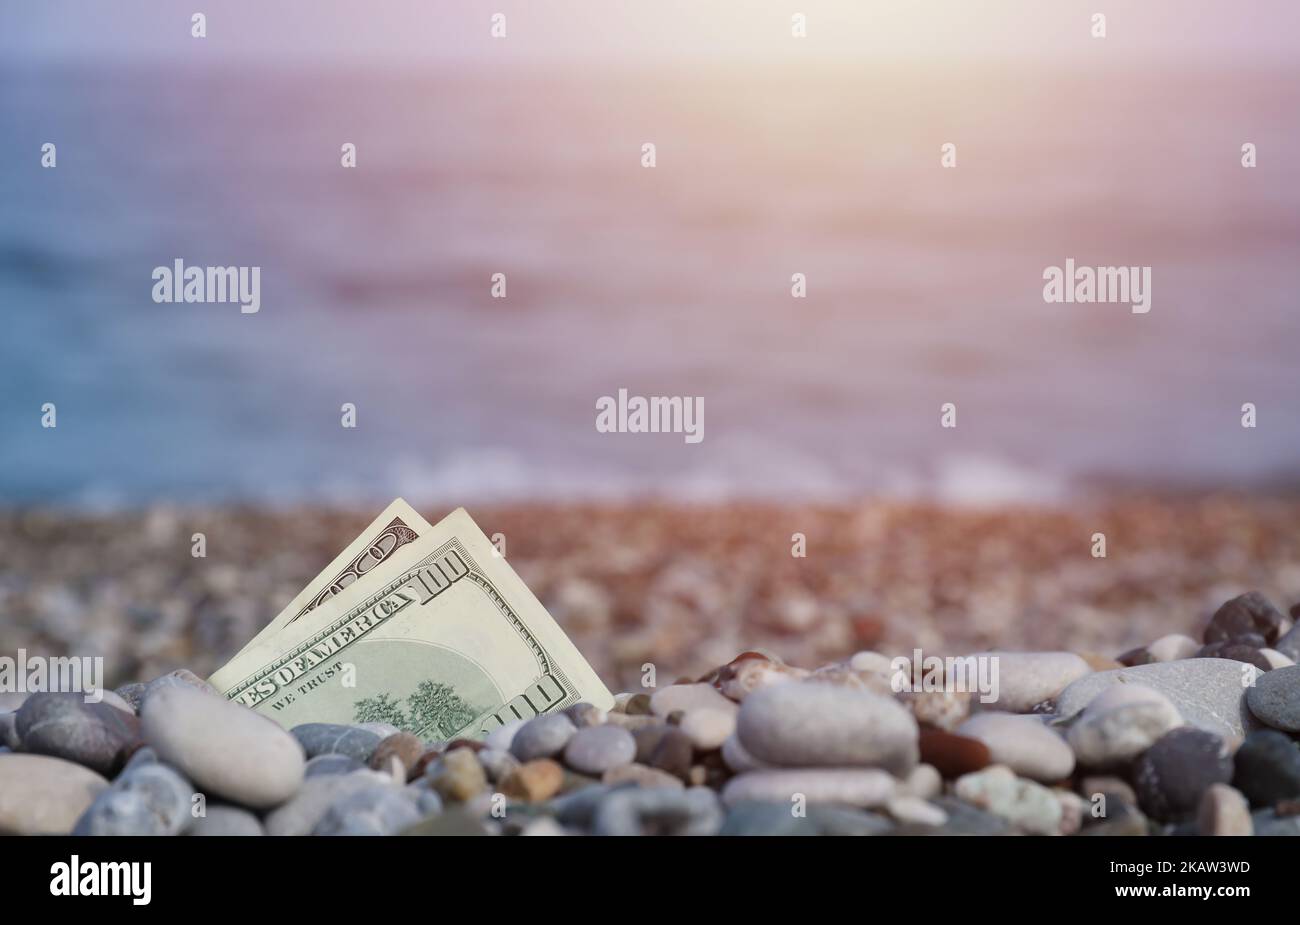 Hundred dollars half covered with round rocks lie on beach close up. Dollar bills partially buried in sea shore stones. Concept finance money holiday Stock Photo